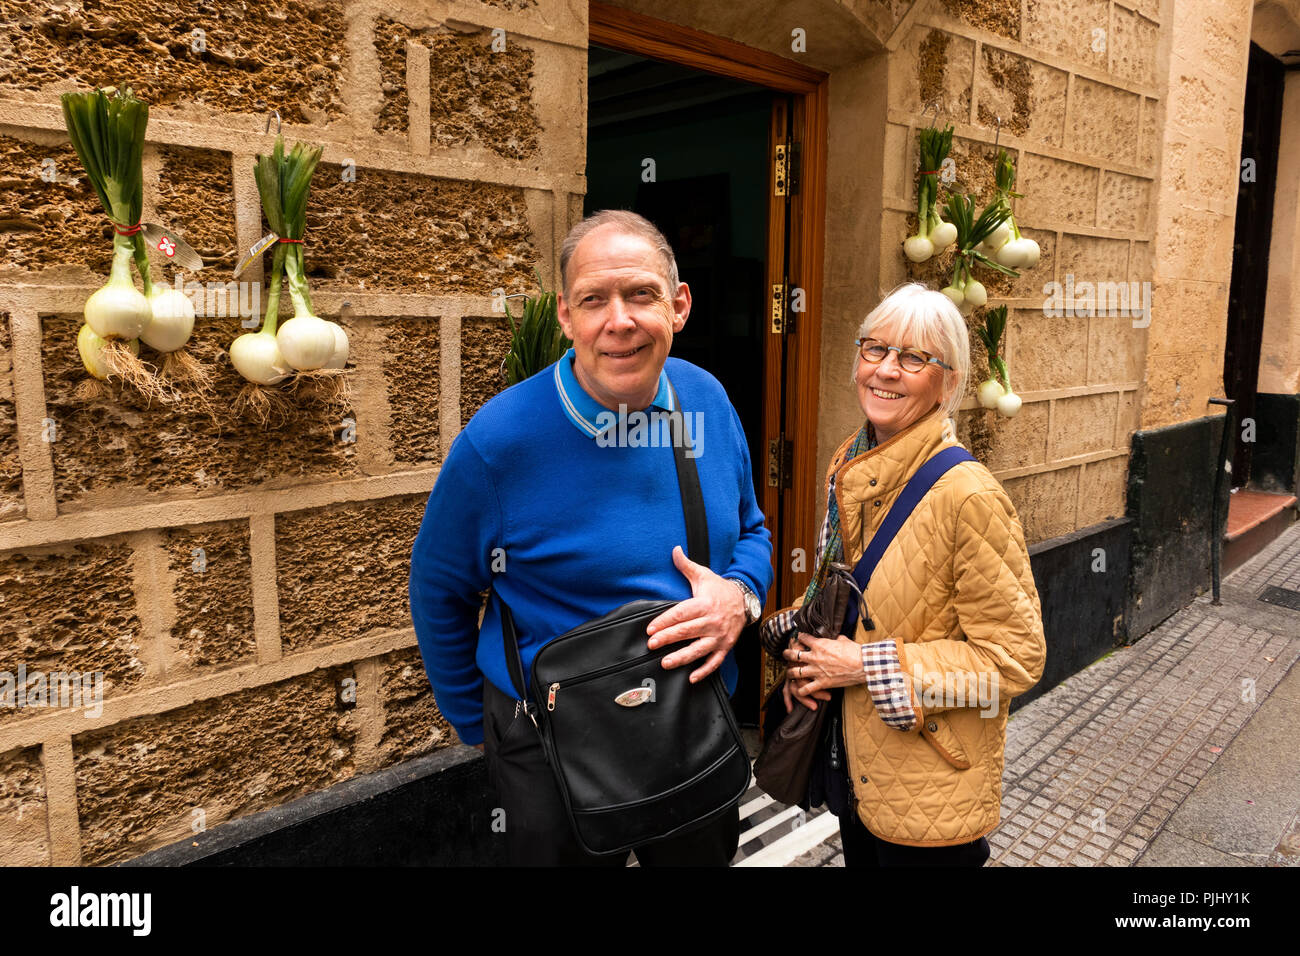 Spain, Cadiz, Calle Sopranis, happy tourists outside vegetable shop with onions outside Stock Photo